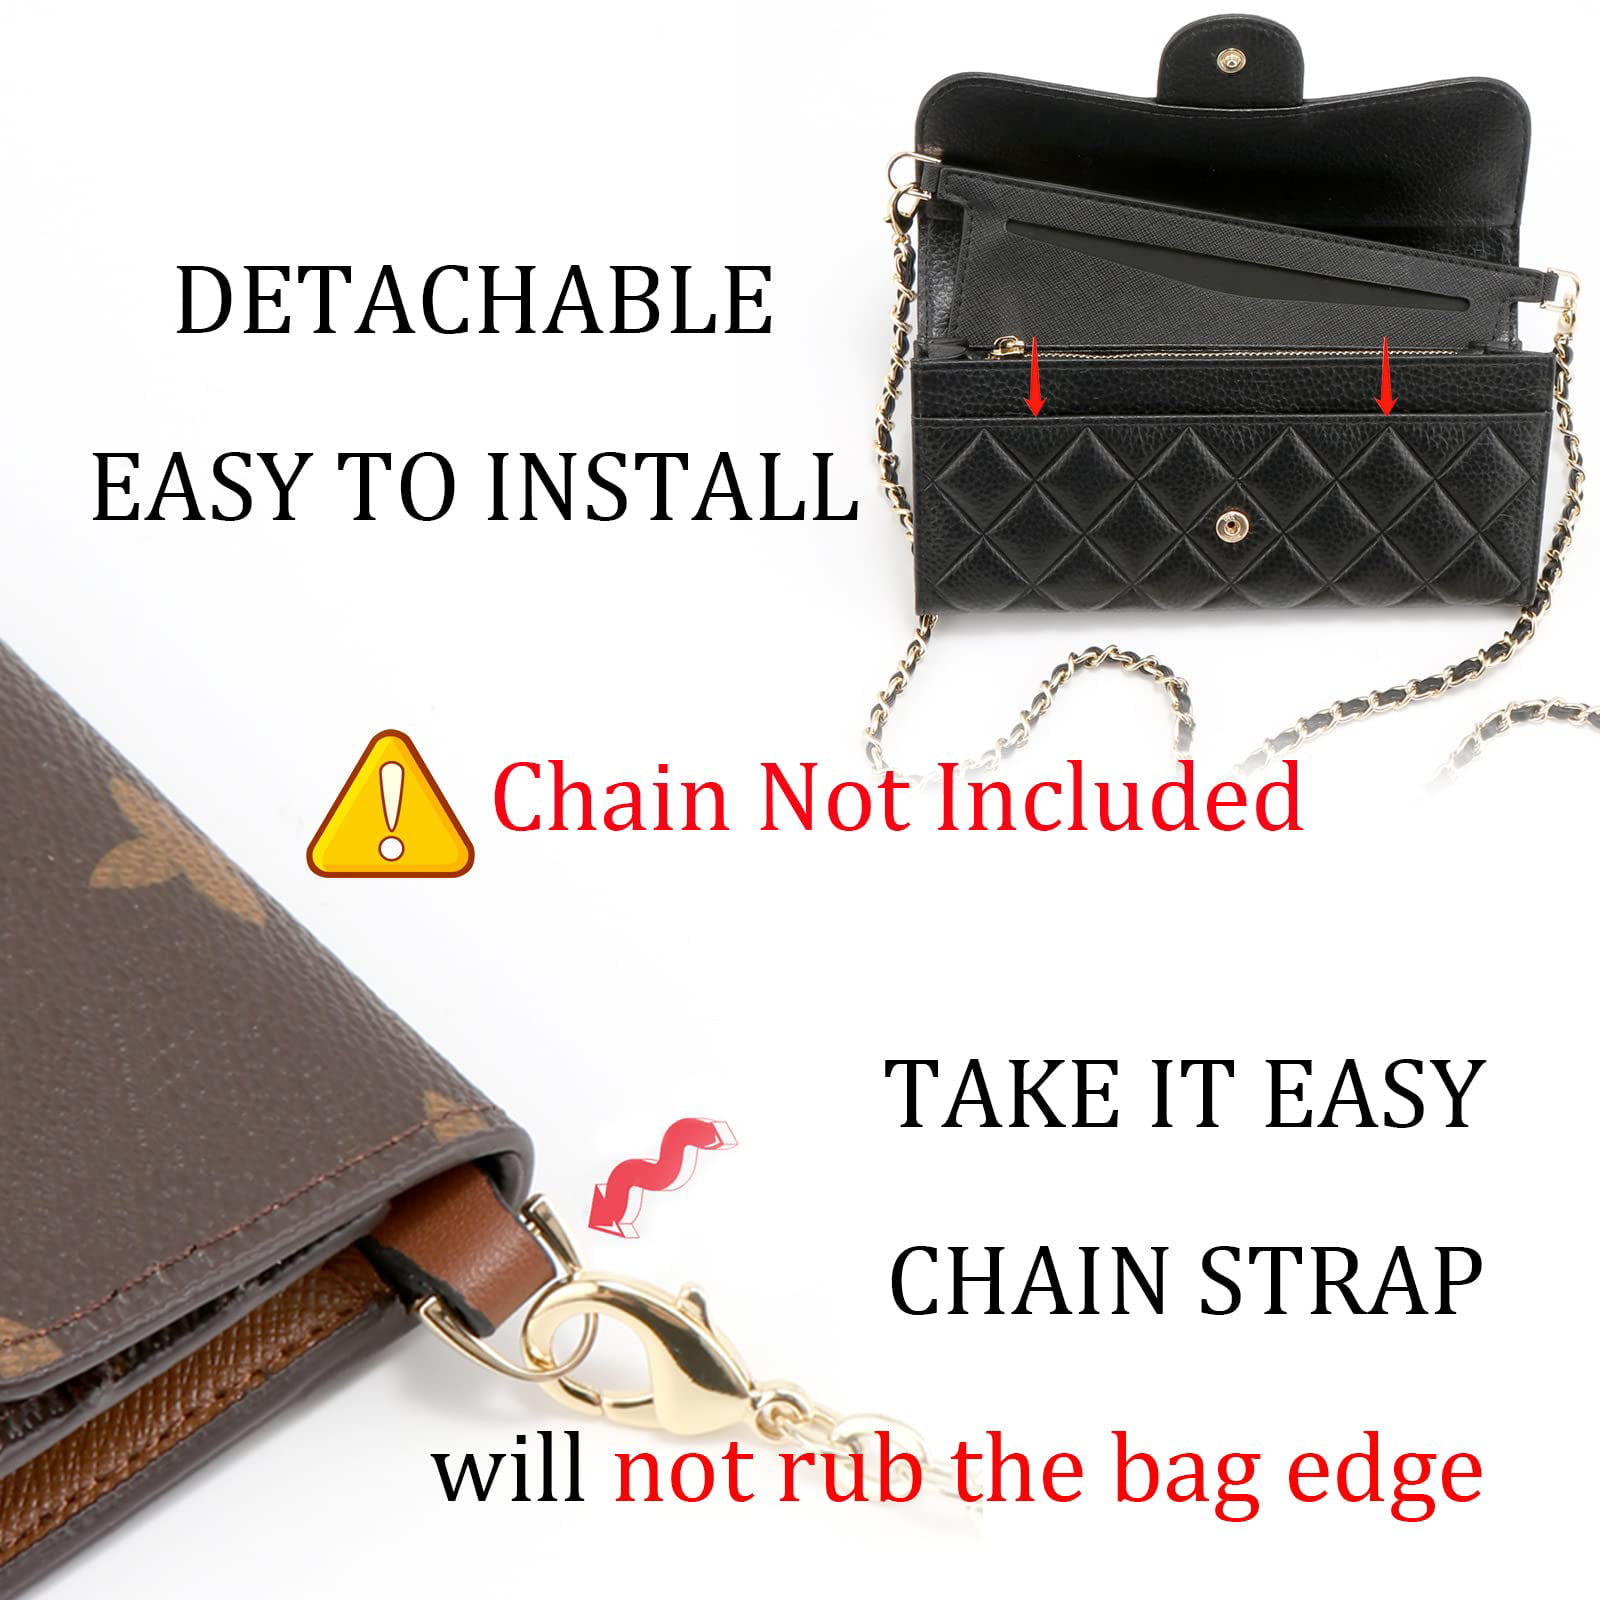 Emilie Wallet Conversion Kit with Zipper & O Rings / Emilie 